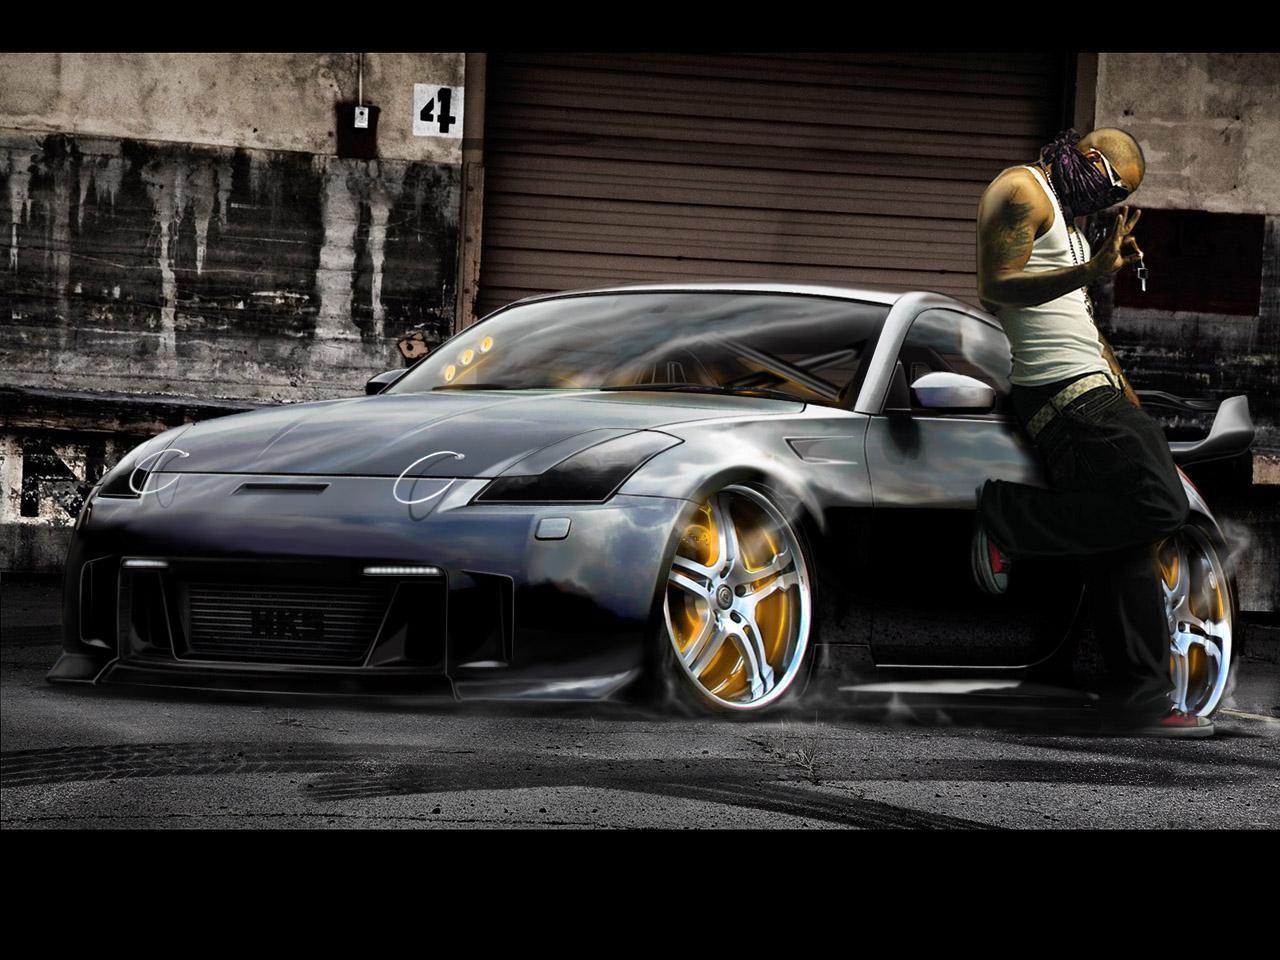 Cars Nissan 350z Tuning picture nr 40070 1280x960